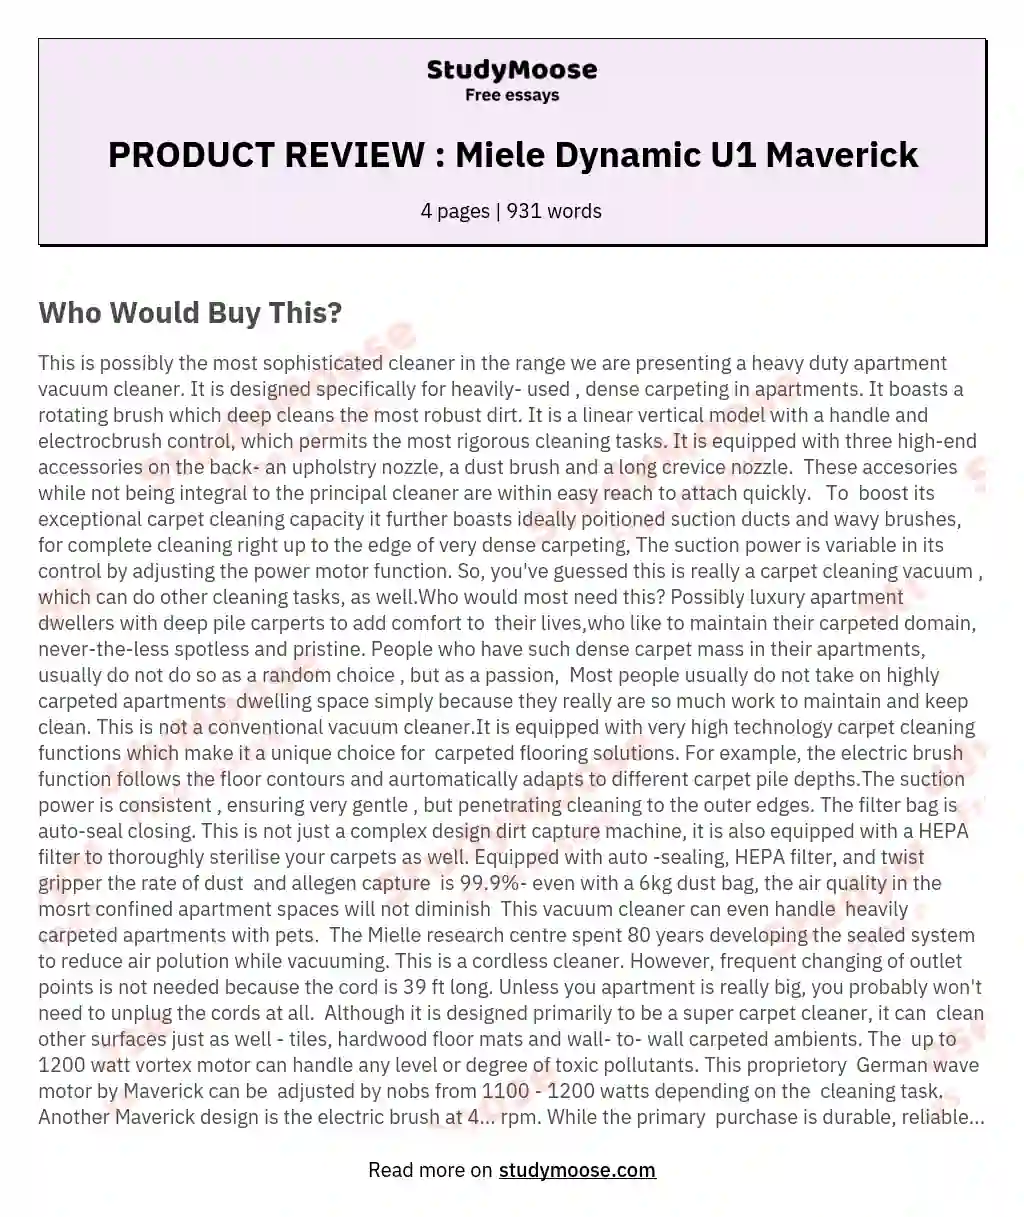 example essay about product review